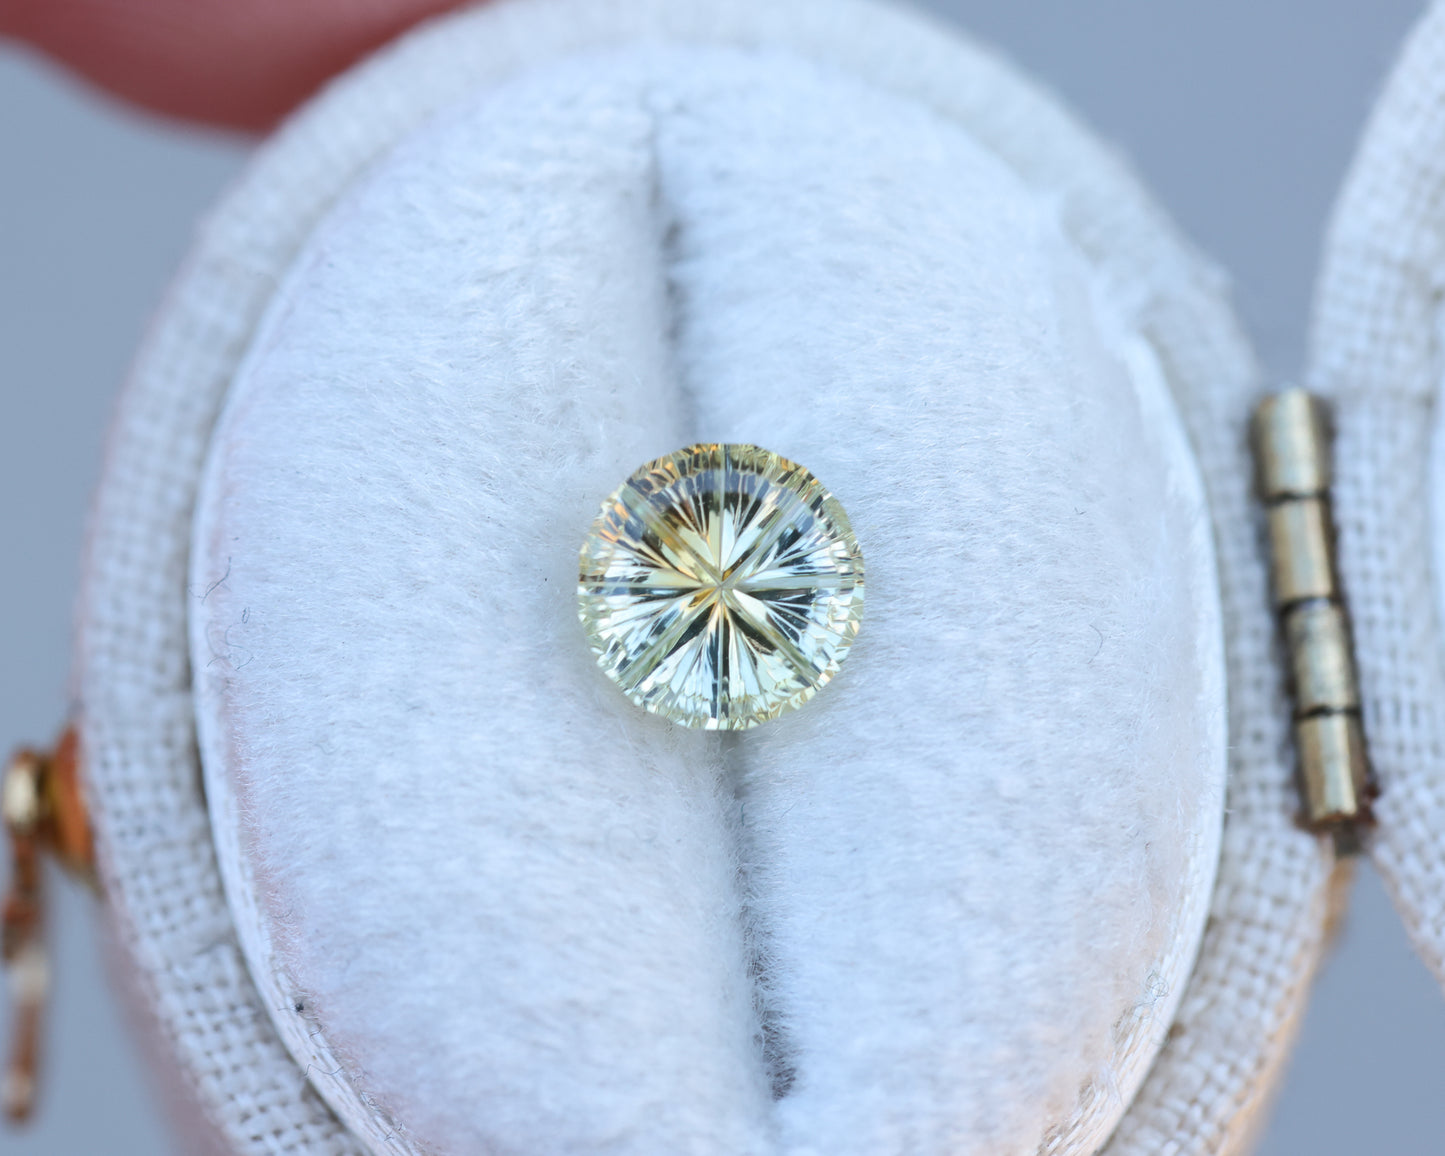 ON HOLD 1.17ct round light yellow sapphire - Starbrite cut by John Dyer